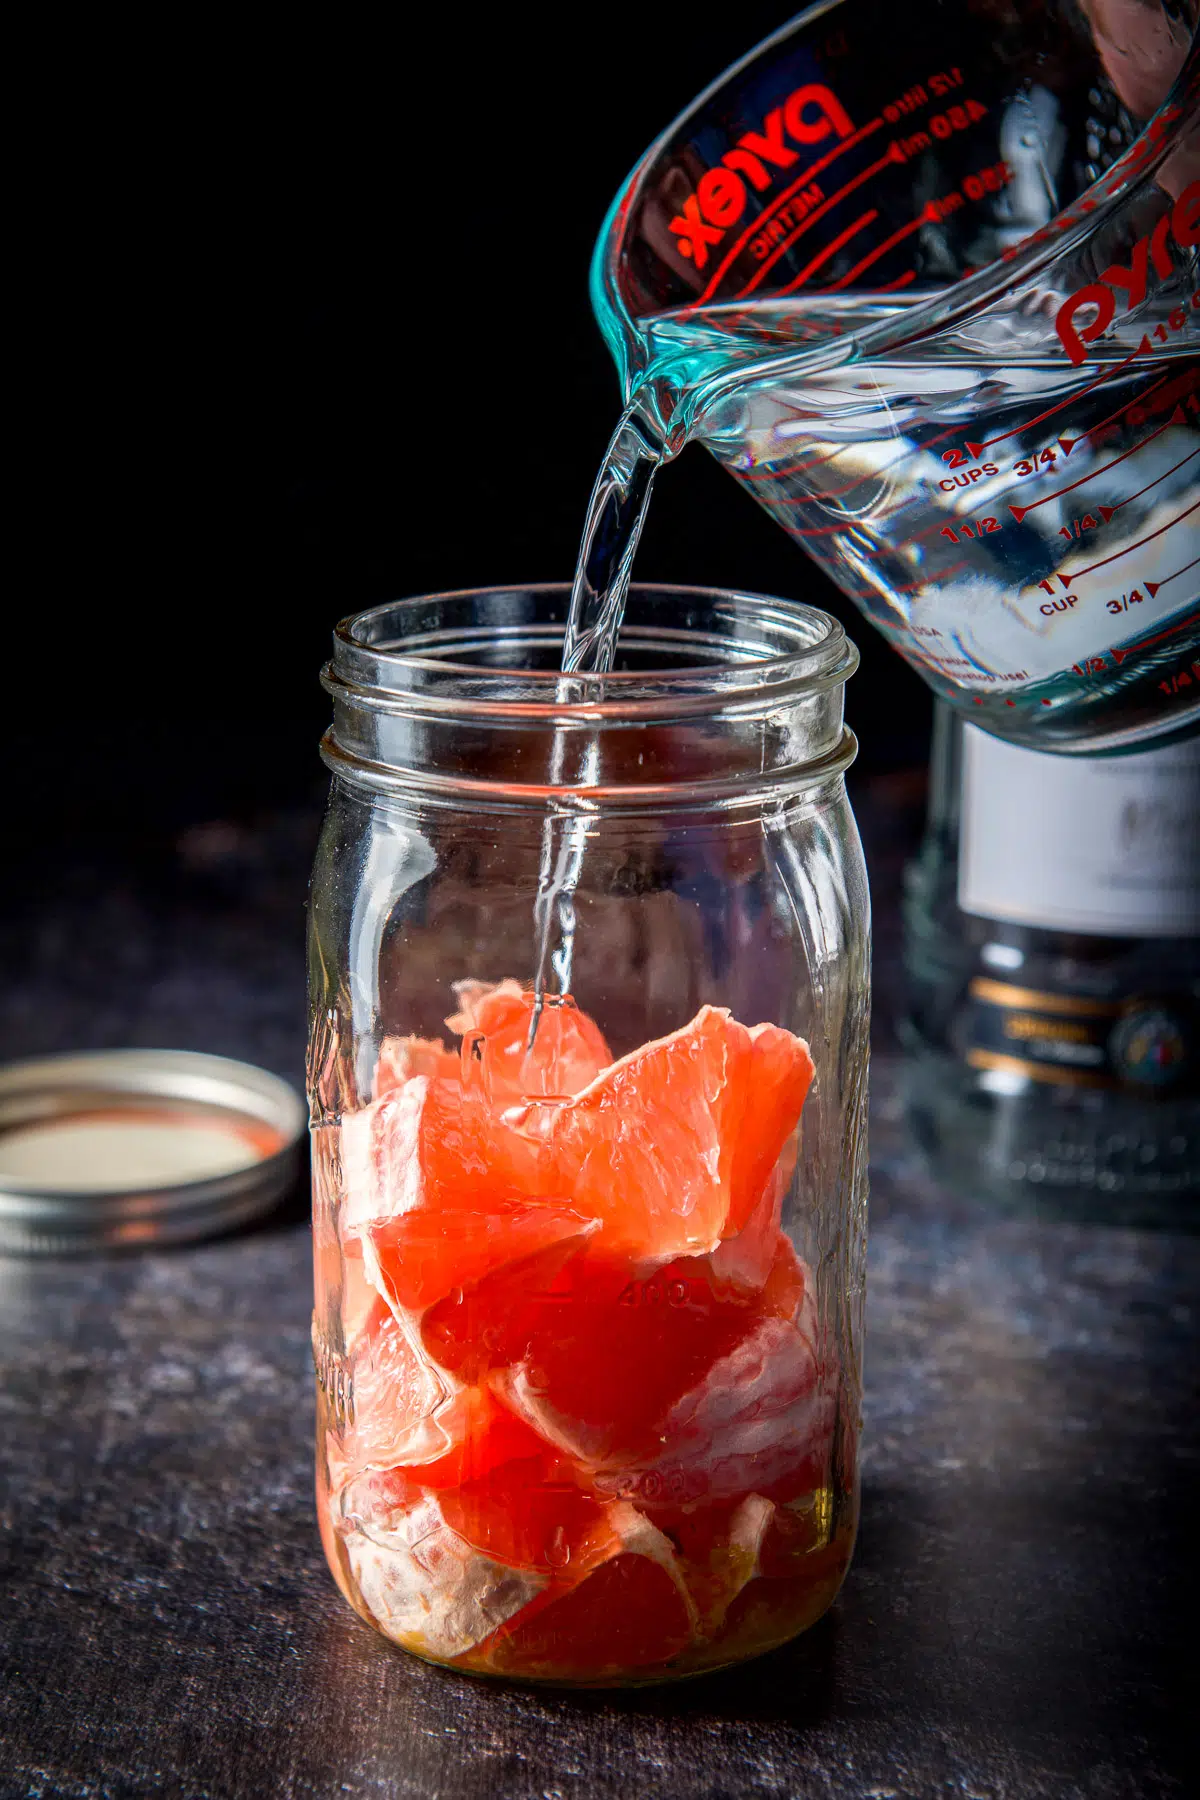 Vodka being poured into a jar of grapefruit